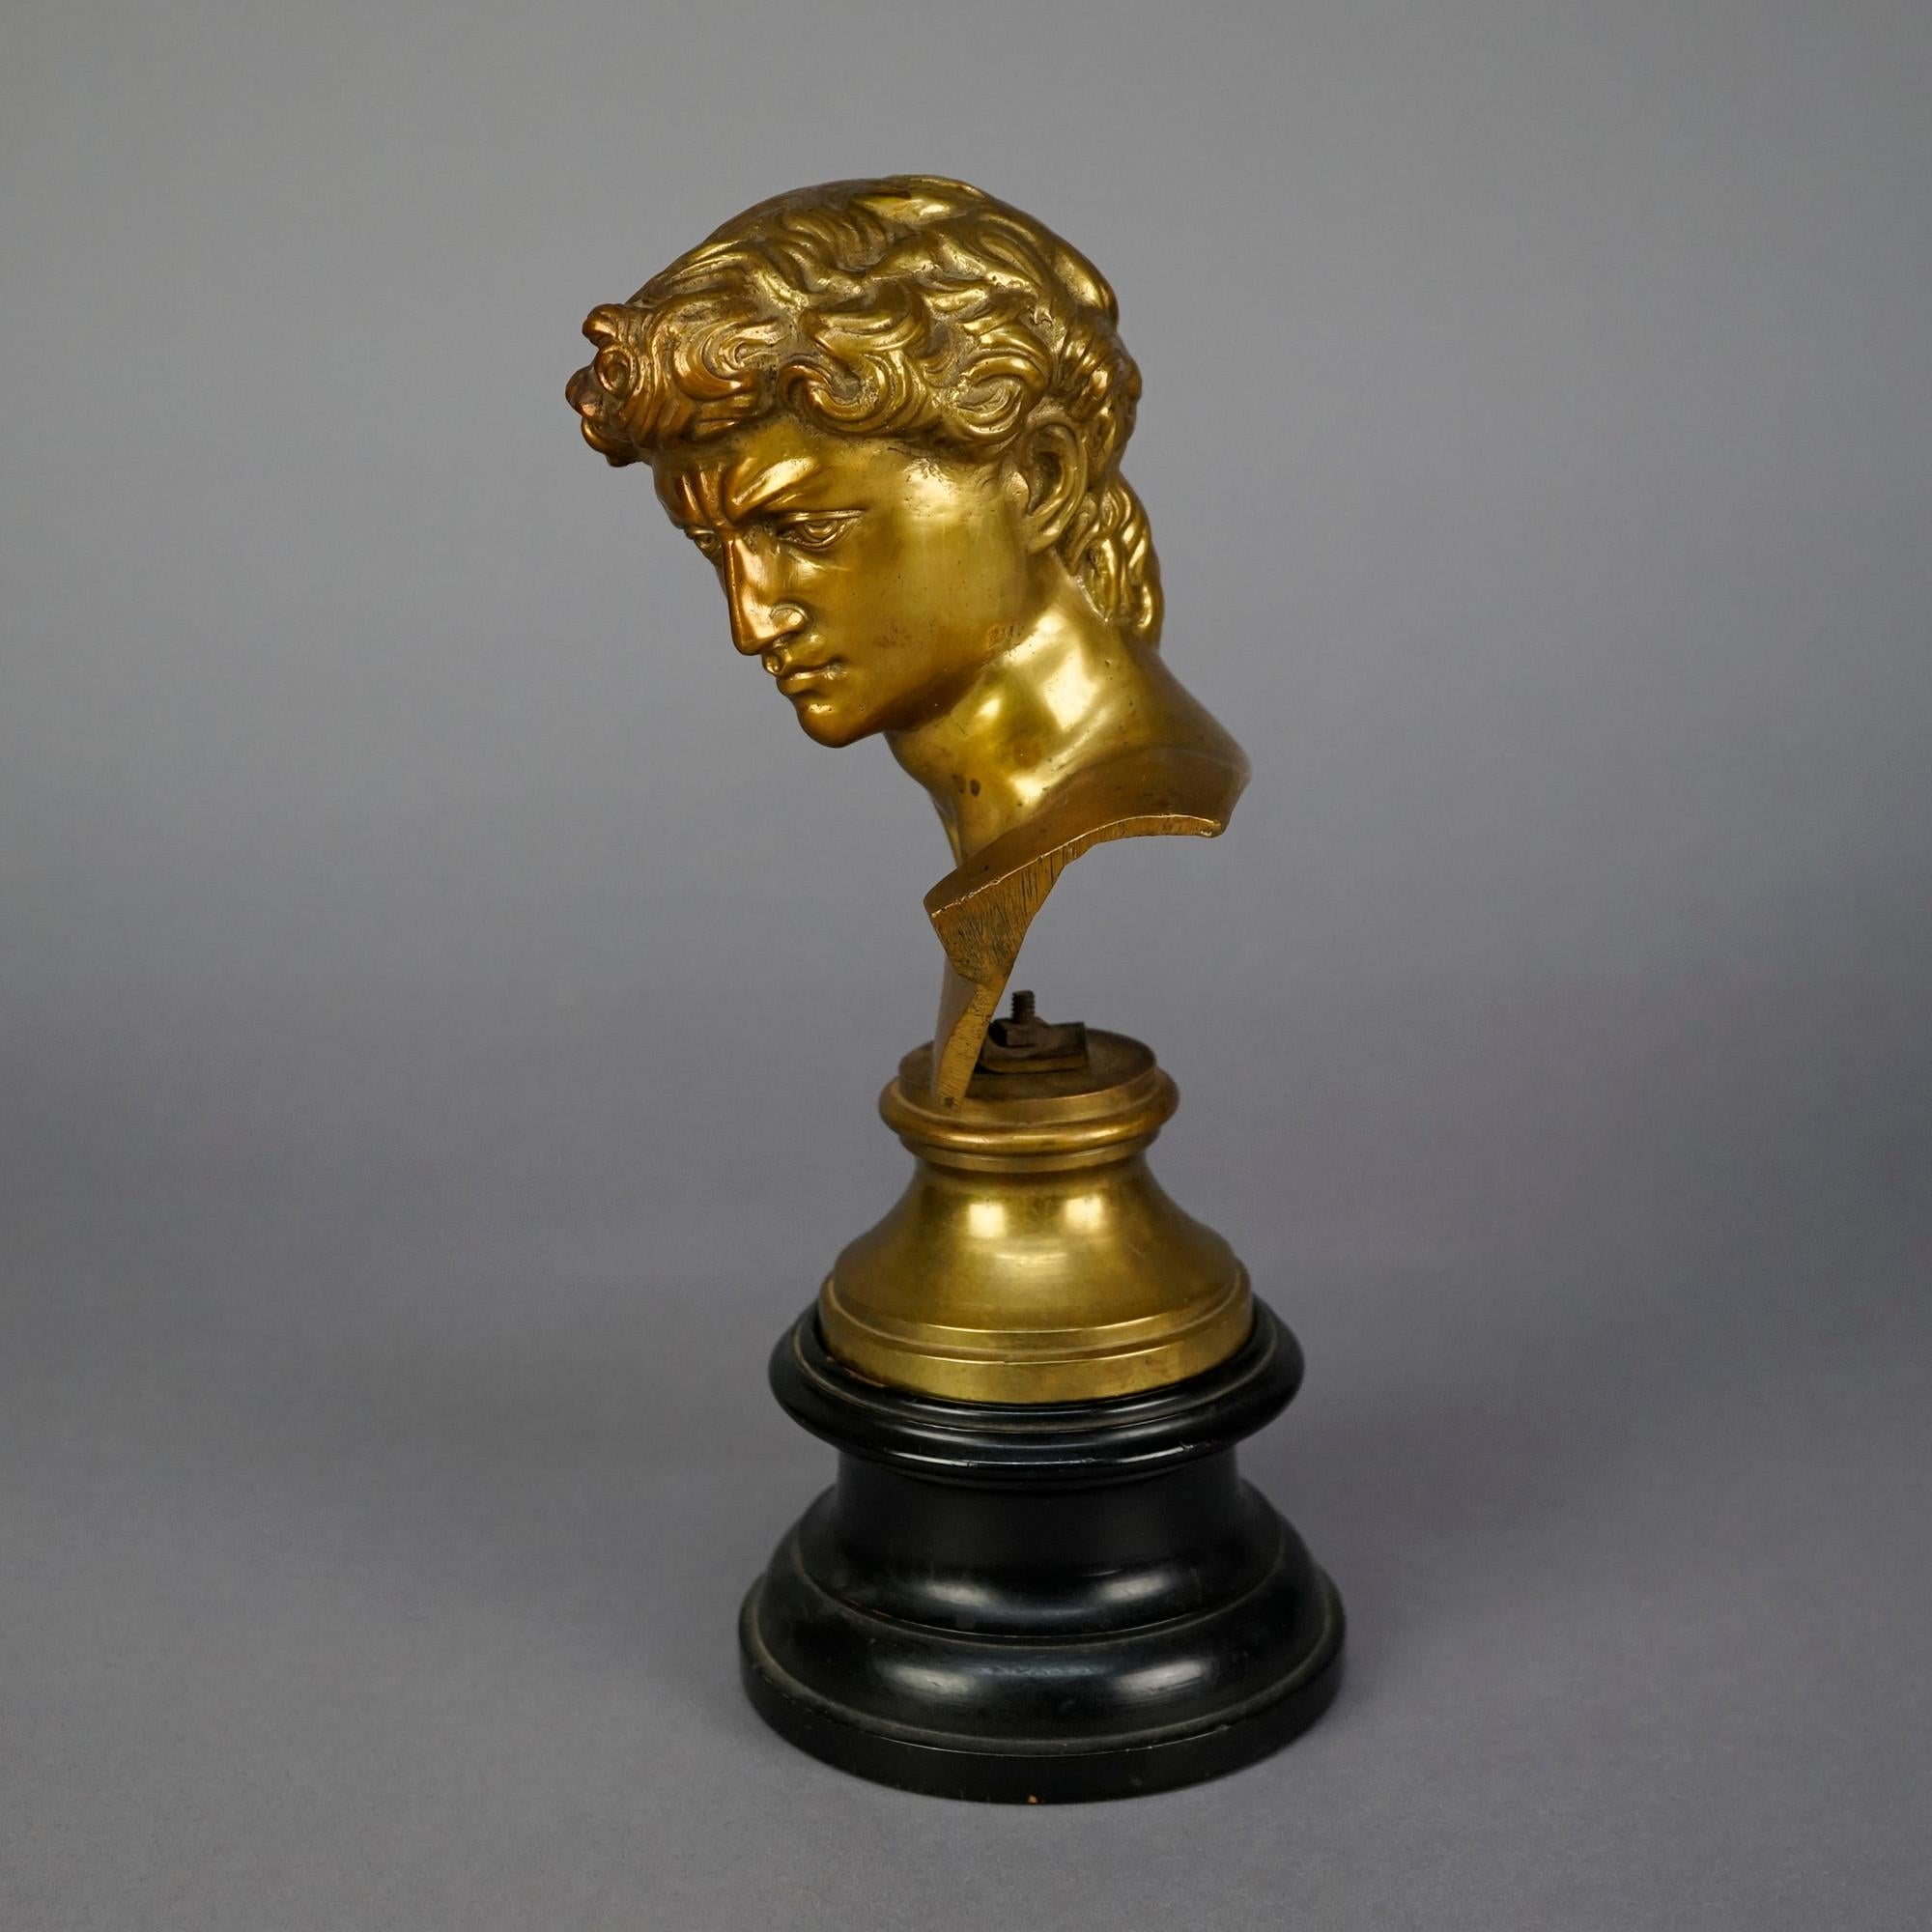 Antique Neoclassical Gilt Bronze Bust Sculpture of a Classical Man, 19th C For Sale 2